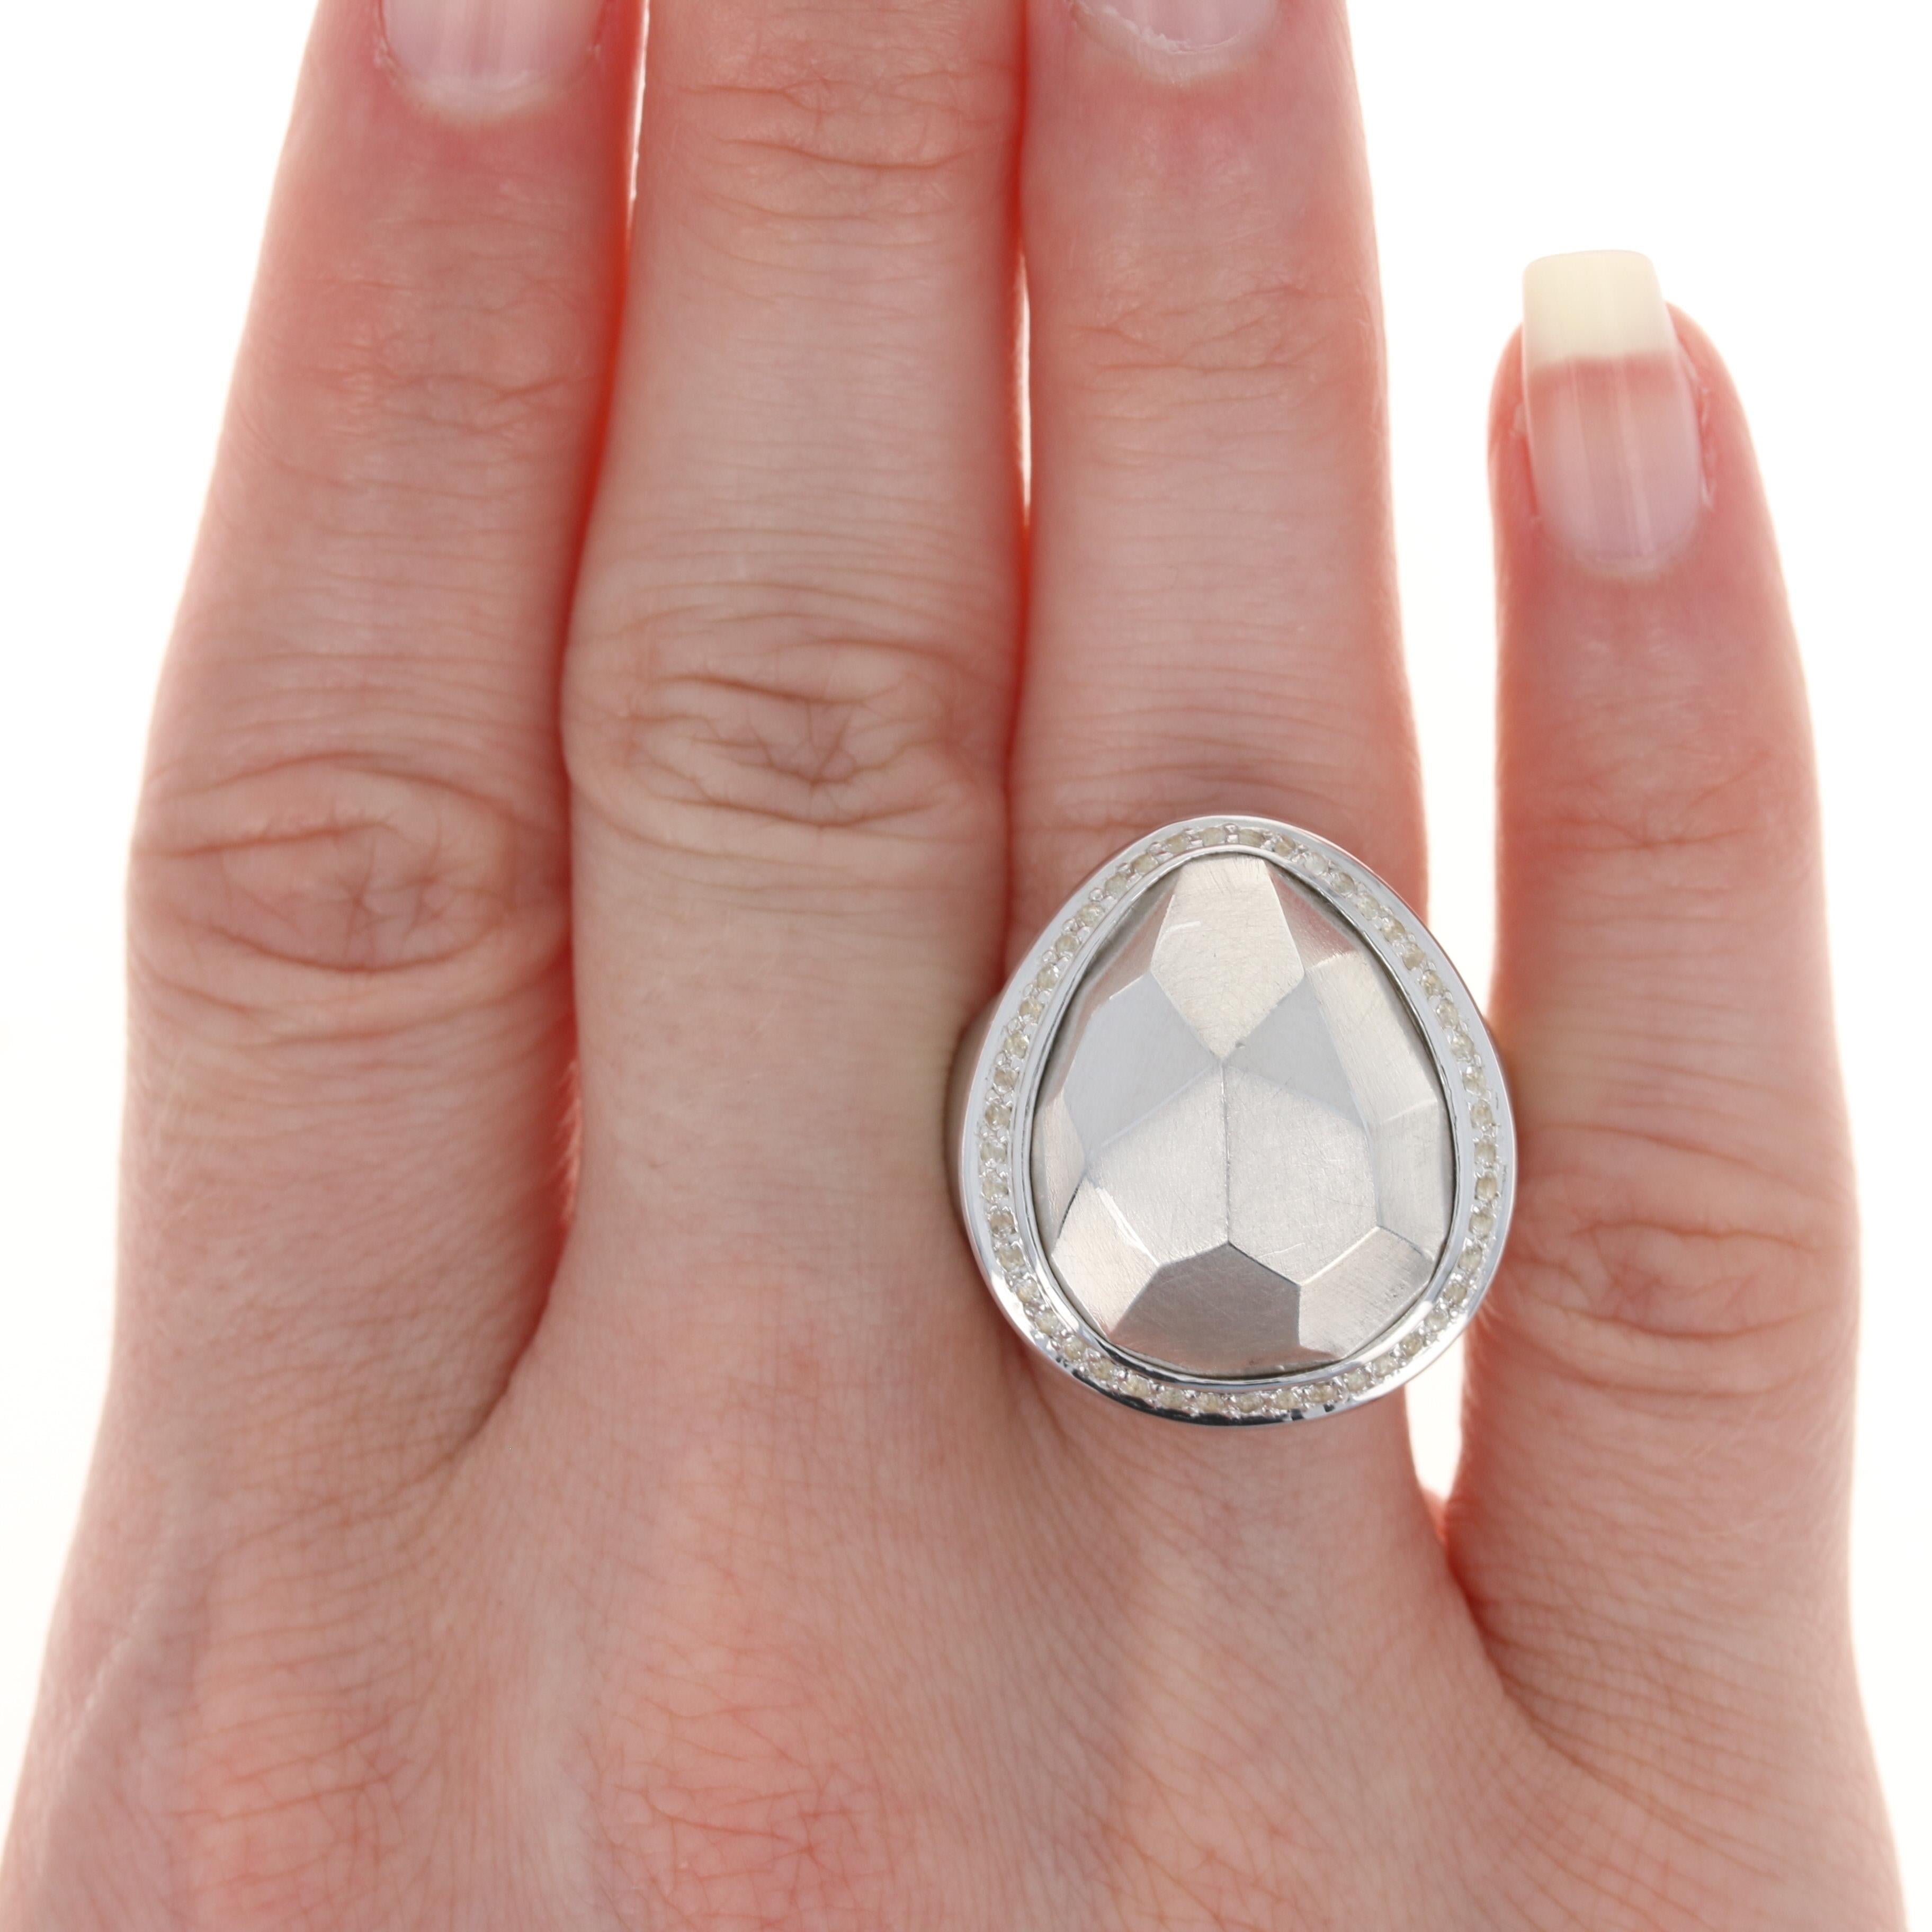 For Sale:  New Bastian Inverun Faceted Statement Ring White Topaz Halo Sterling Silver 7.5 2